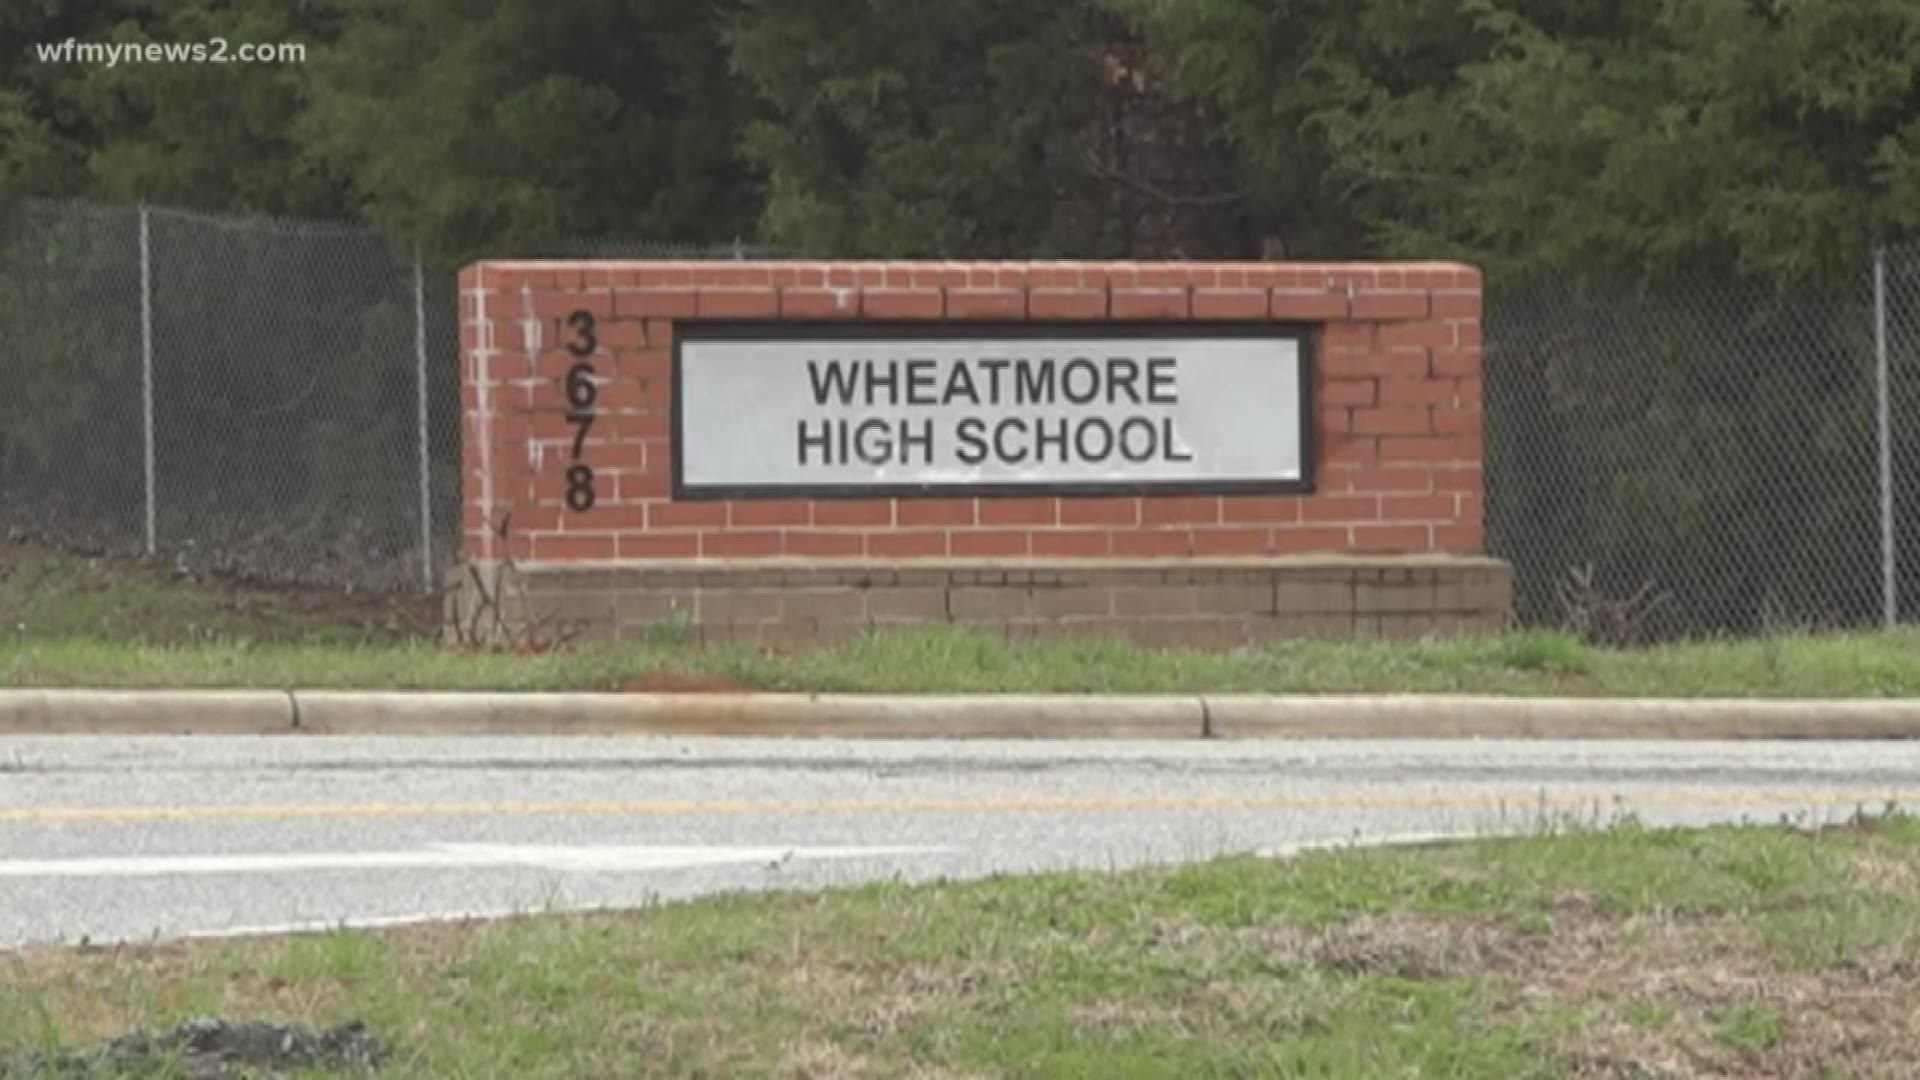 The Wheatmore student was removed from school on February 28 and indicted by a Grand Jury on Monday.